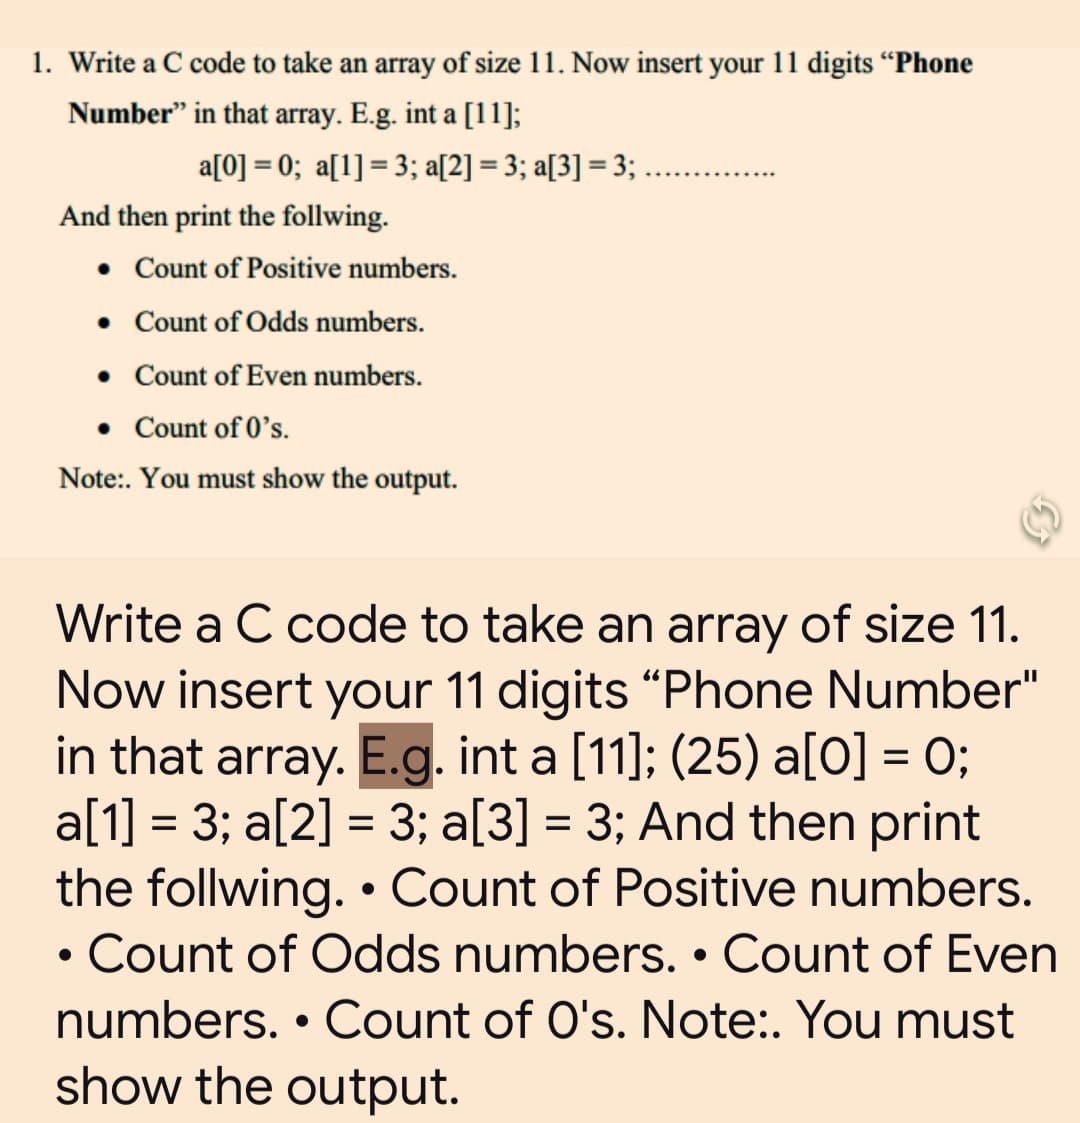 1. Write a C code to take an array of size 11. Now insert your 11 digits "Phone
Number" in that array. E.g. int a [11];
a[0] = 0; a[1] = 3; a[2] = 3; a[3] = 3; ...........
And then print the follwing.
• Count of Positive numbers.
• Count of Odds numbers.
• Count of Even numbers.
• Count of 0's.
Note:. You must show the output.
Write a C code to take an array of size 11.
Now insert your 11 digits "Phone Number"
in that array. E.g. int a [11]; (25) a[0] = 0;
a[1] = 3; a[2] = 3; a[3] = 3; And then print
the follwing. • Count of Positive numbers.
Count of Odds numbers. • Count of Even
numbers. • Count of O's. Note:. You must
show the output.
●